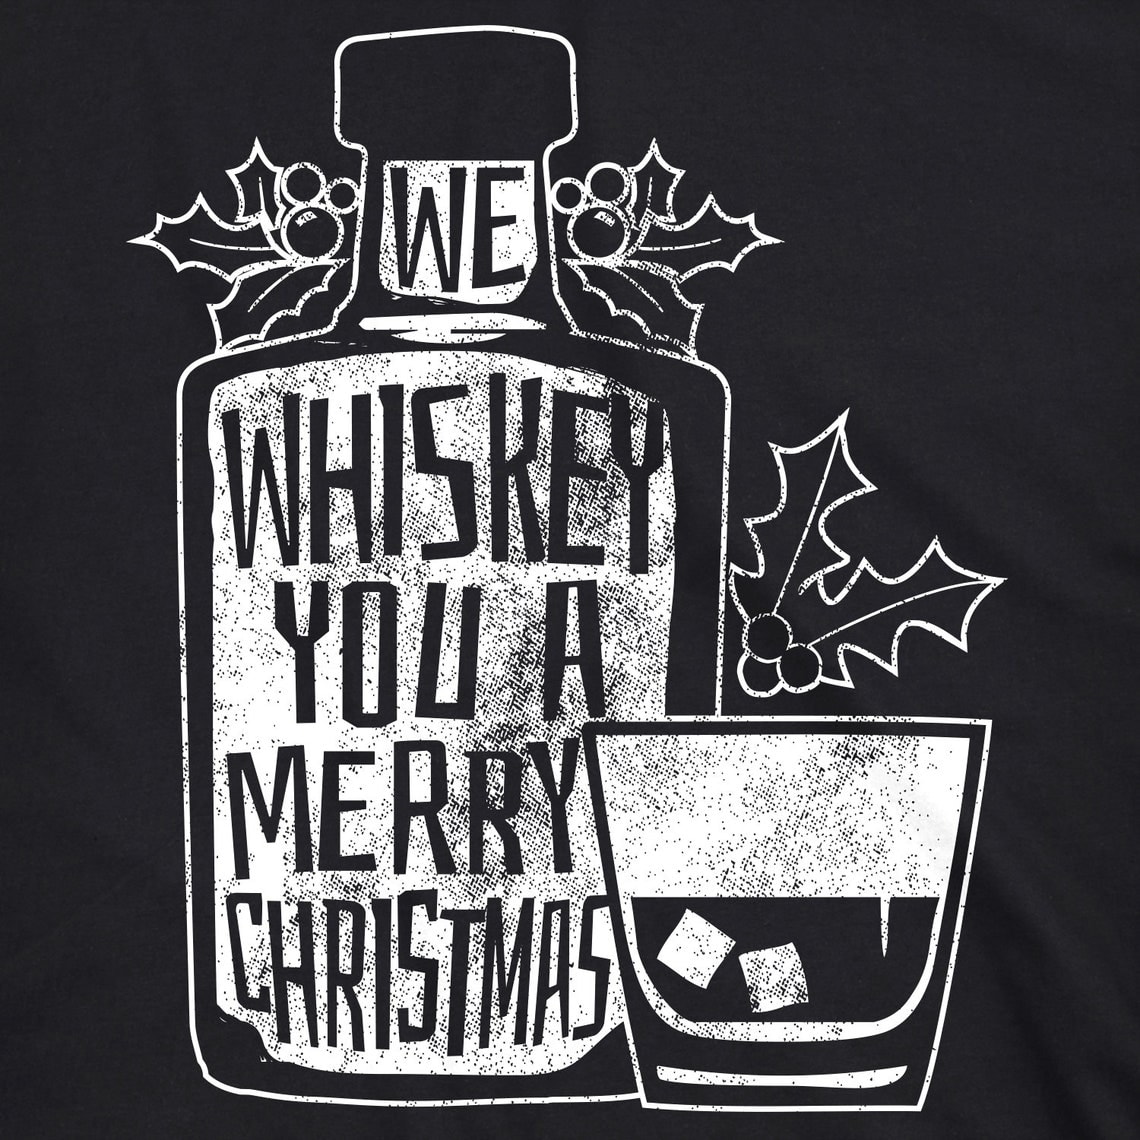 We Whiskey You A Merry Christmas, Christmas Shirt Men, Whisky Christmas Shirt, Black T Shirt Xmas, Whiskey Lover Gift, Xmas Drinking Gifts